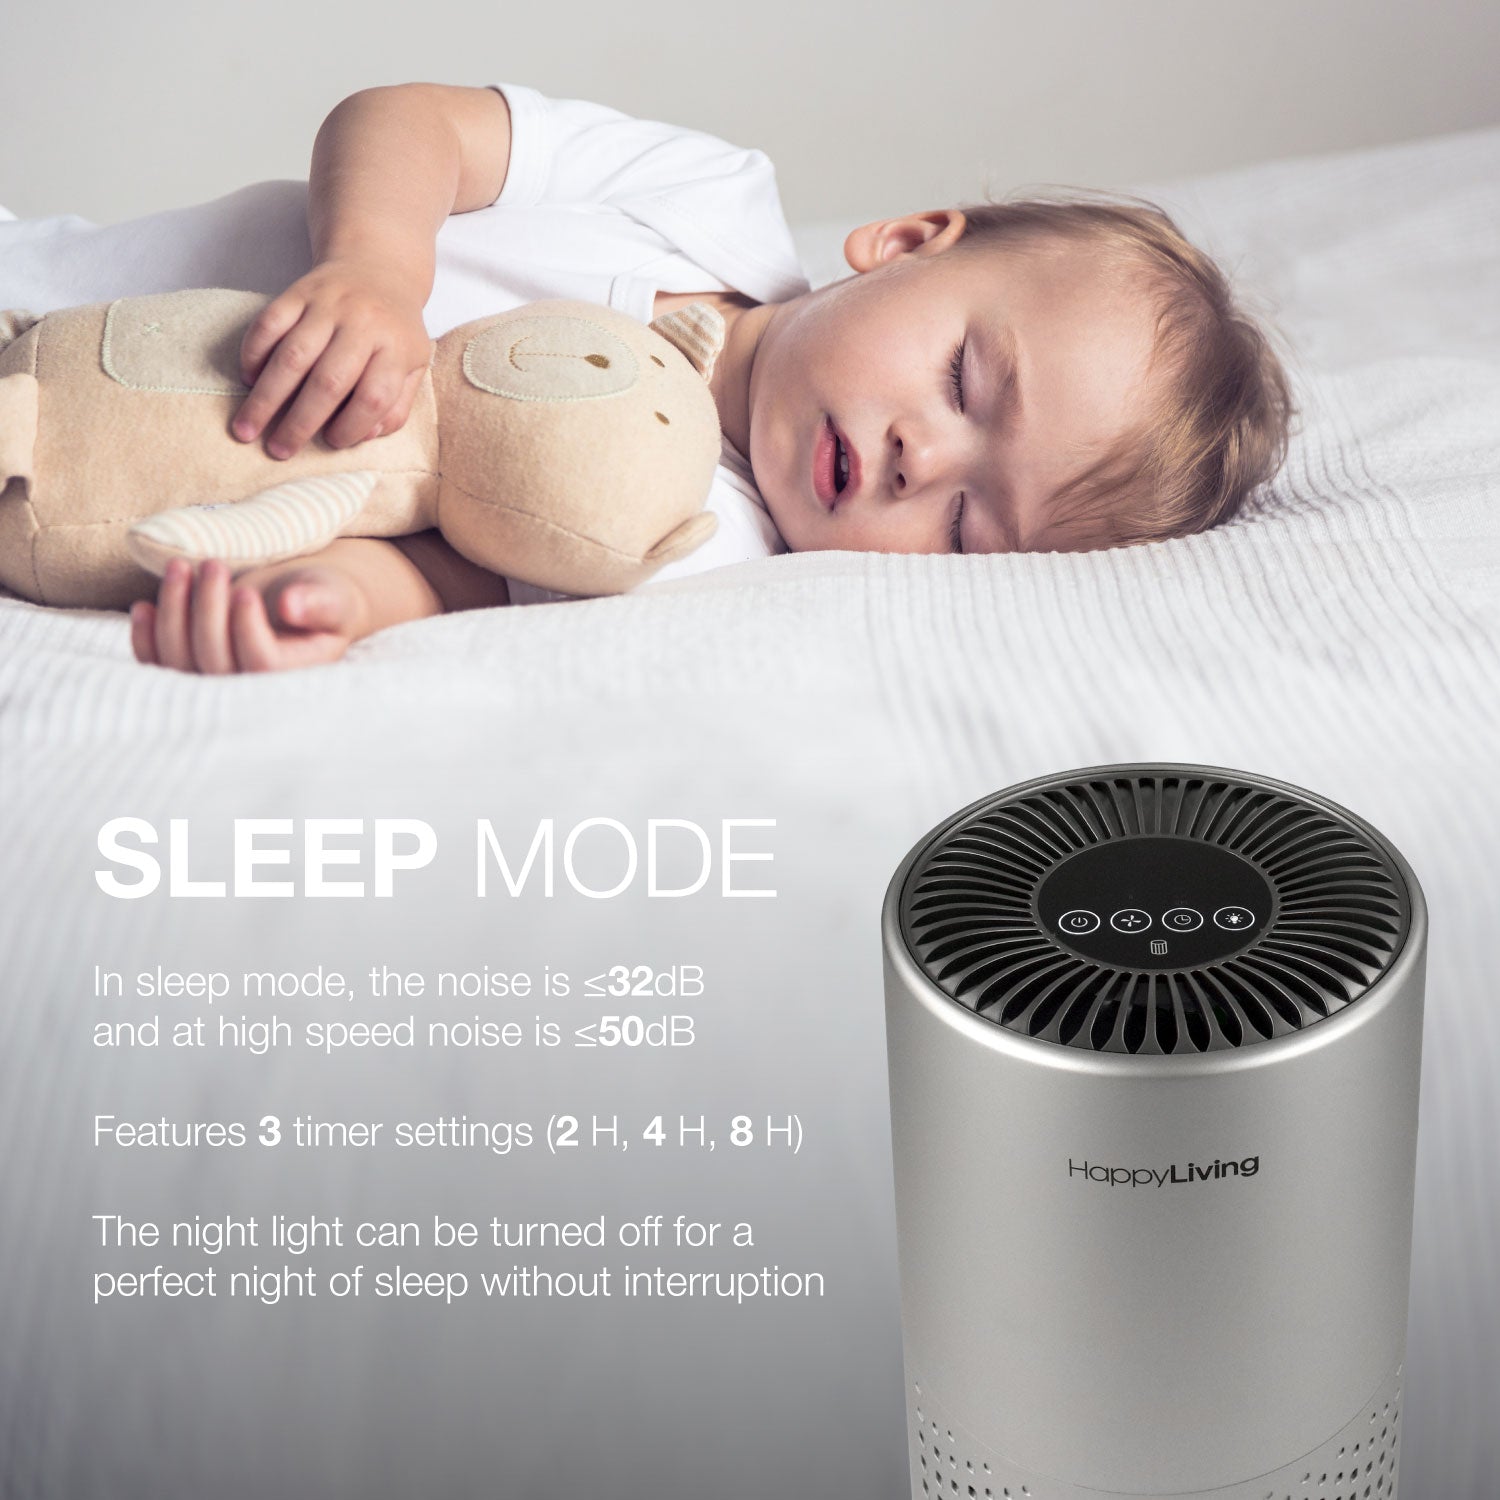 An image showing the sleep mode of the air purifier.